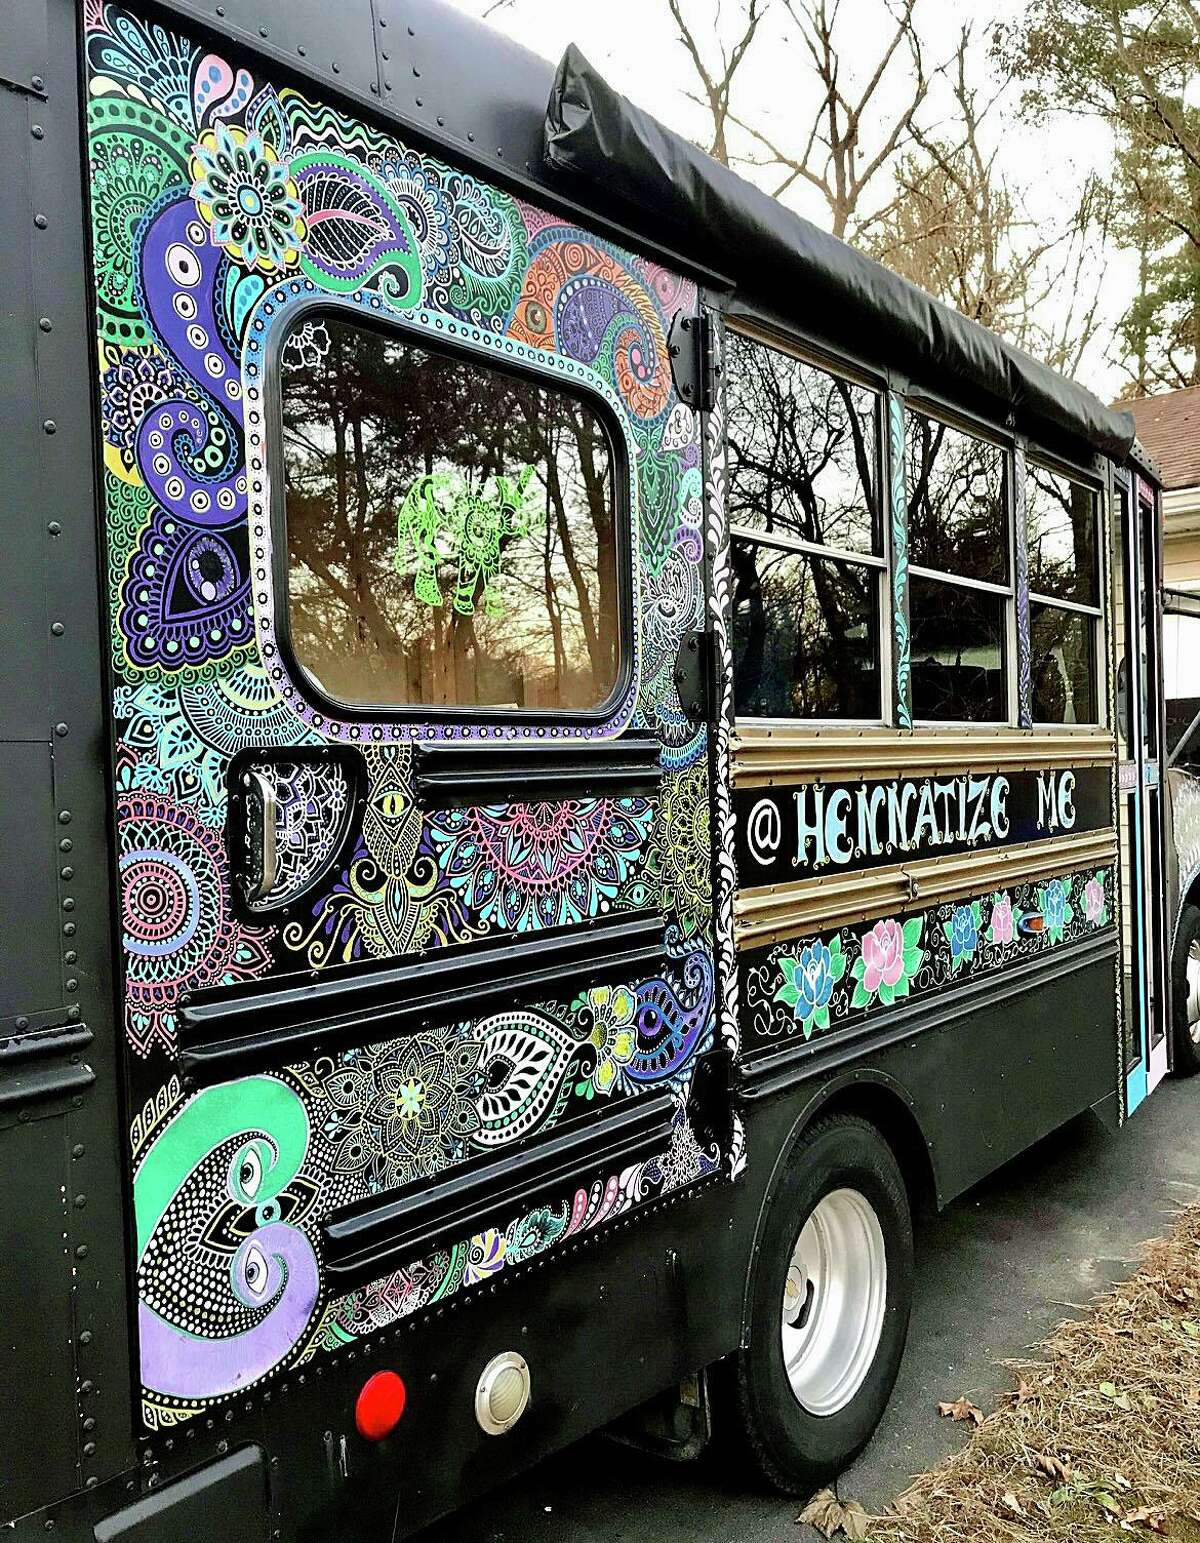 Hennatize Me truck, which will be offering henna tattoos at the Imagine New Age Free Festival in Branford on Sunday, June 12.